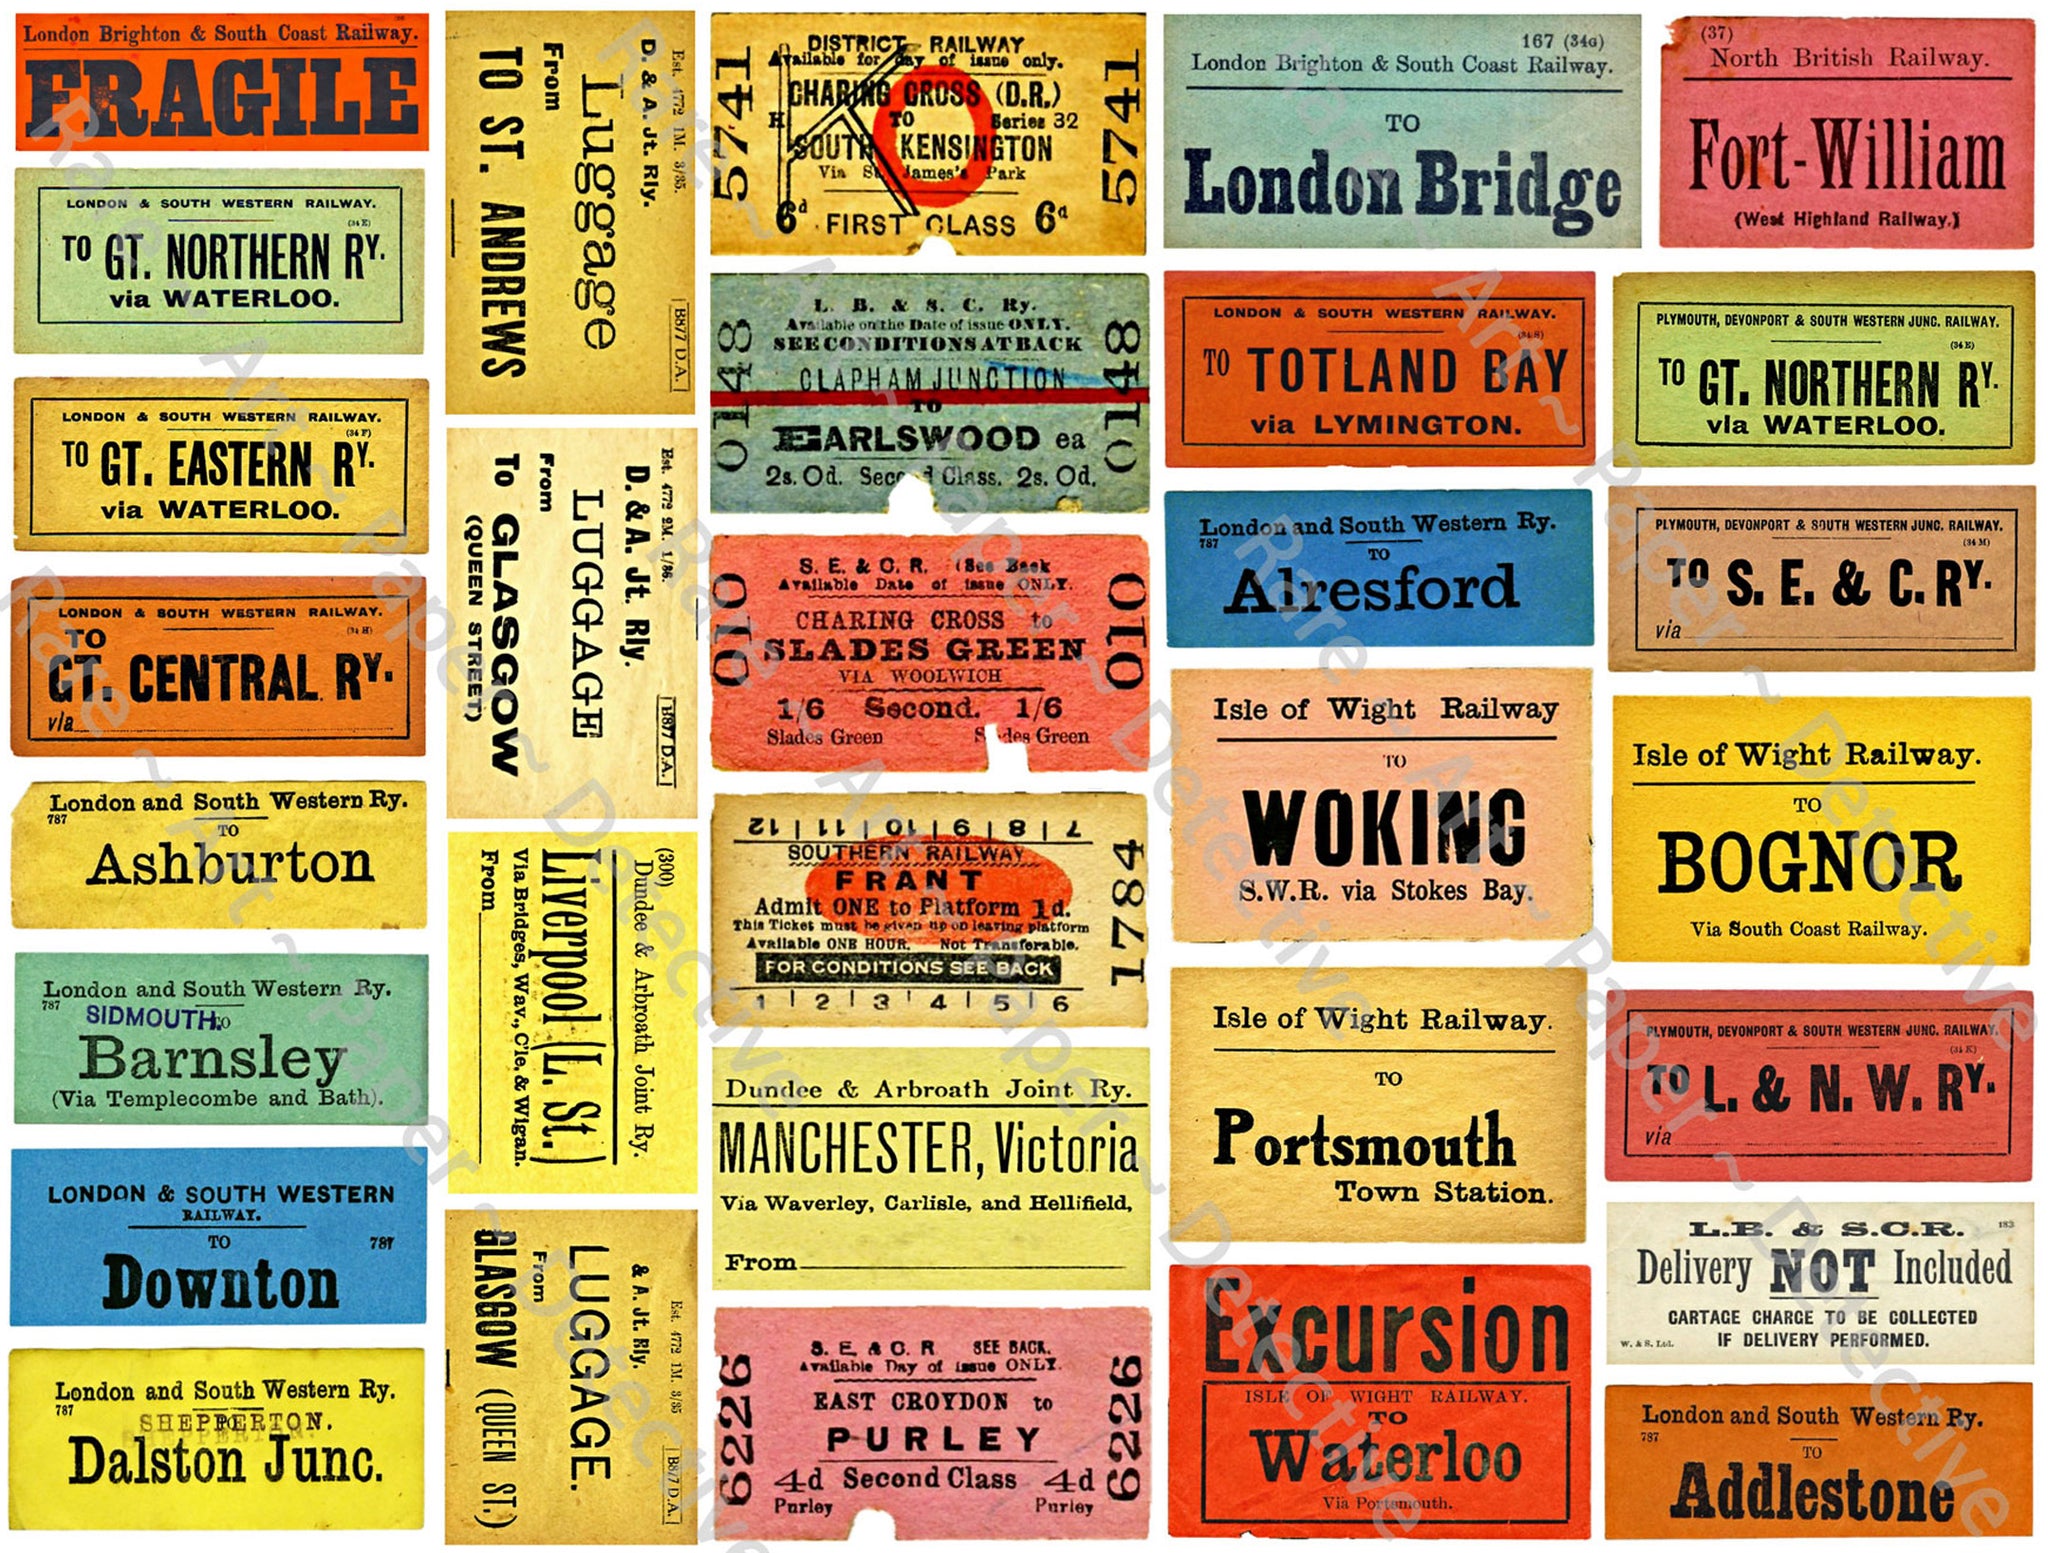 British Railway Luggage Labels & Ticket Stub Stickers, Authentic Looking & Colorful Travel Labels, 8.5" x 11" Decal Sheet for Suitcases, #769